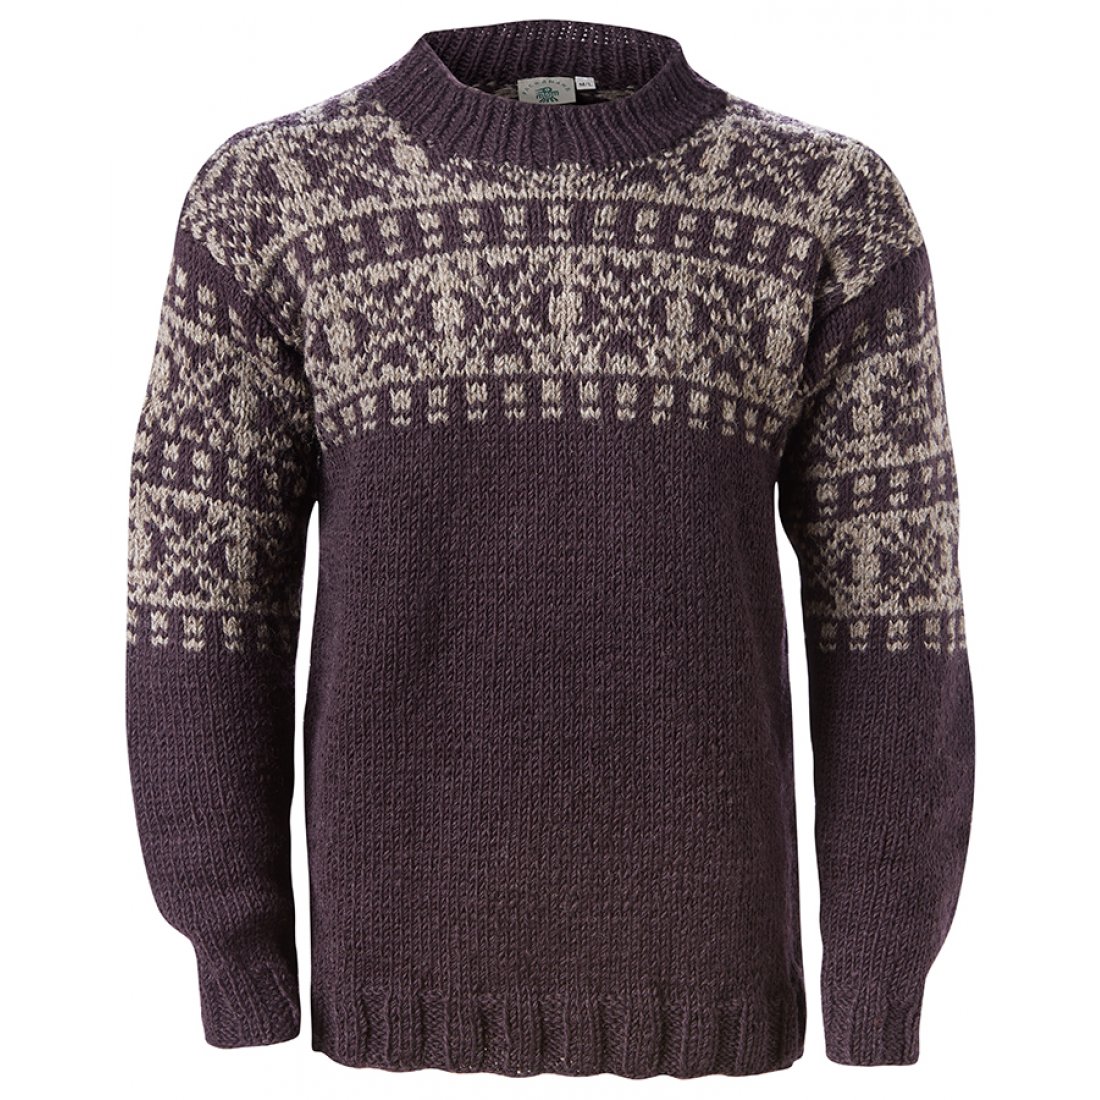 Men's New England Sweater - Charcoal - Pachamama